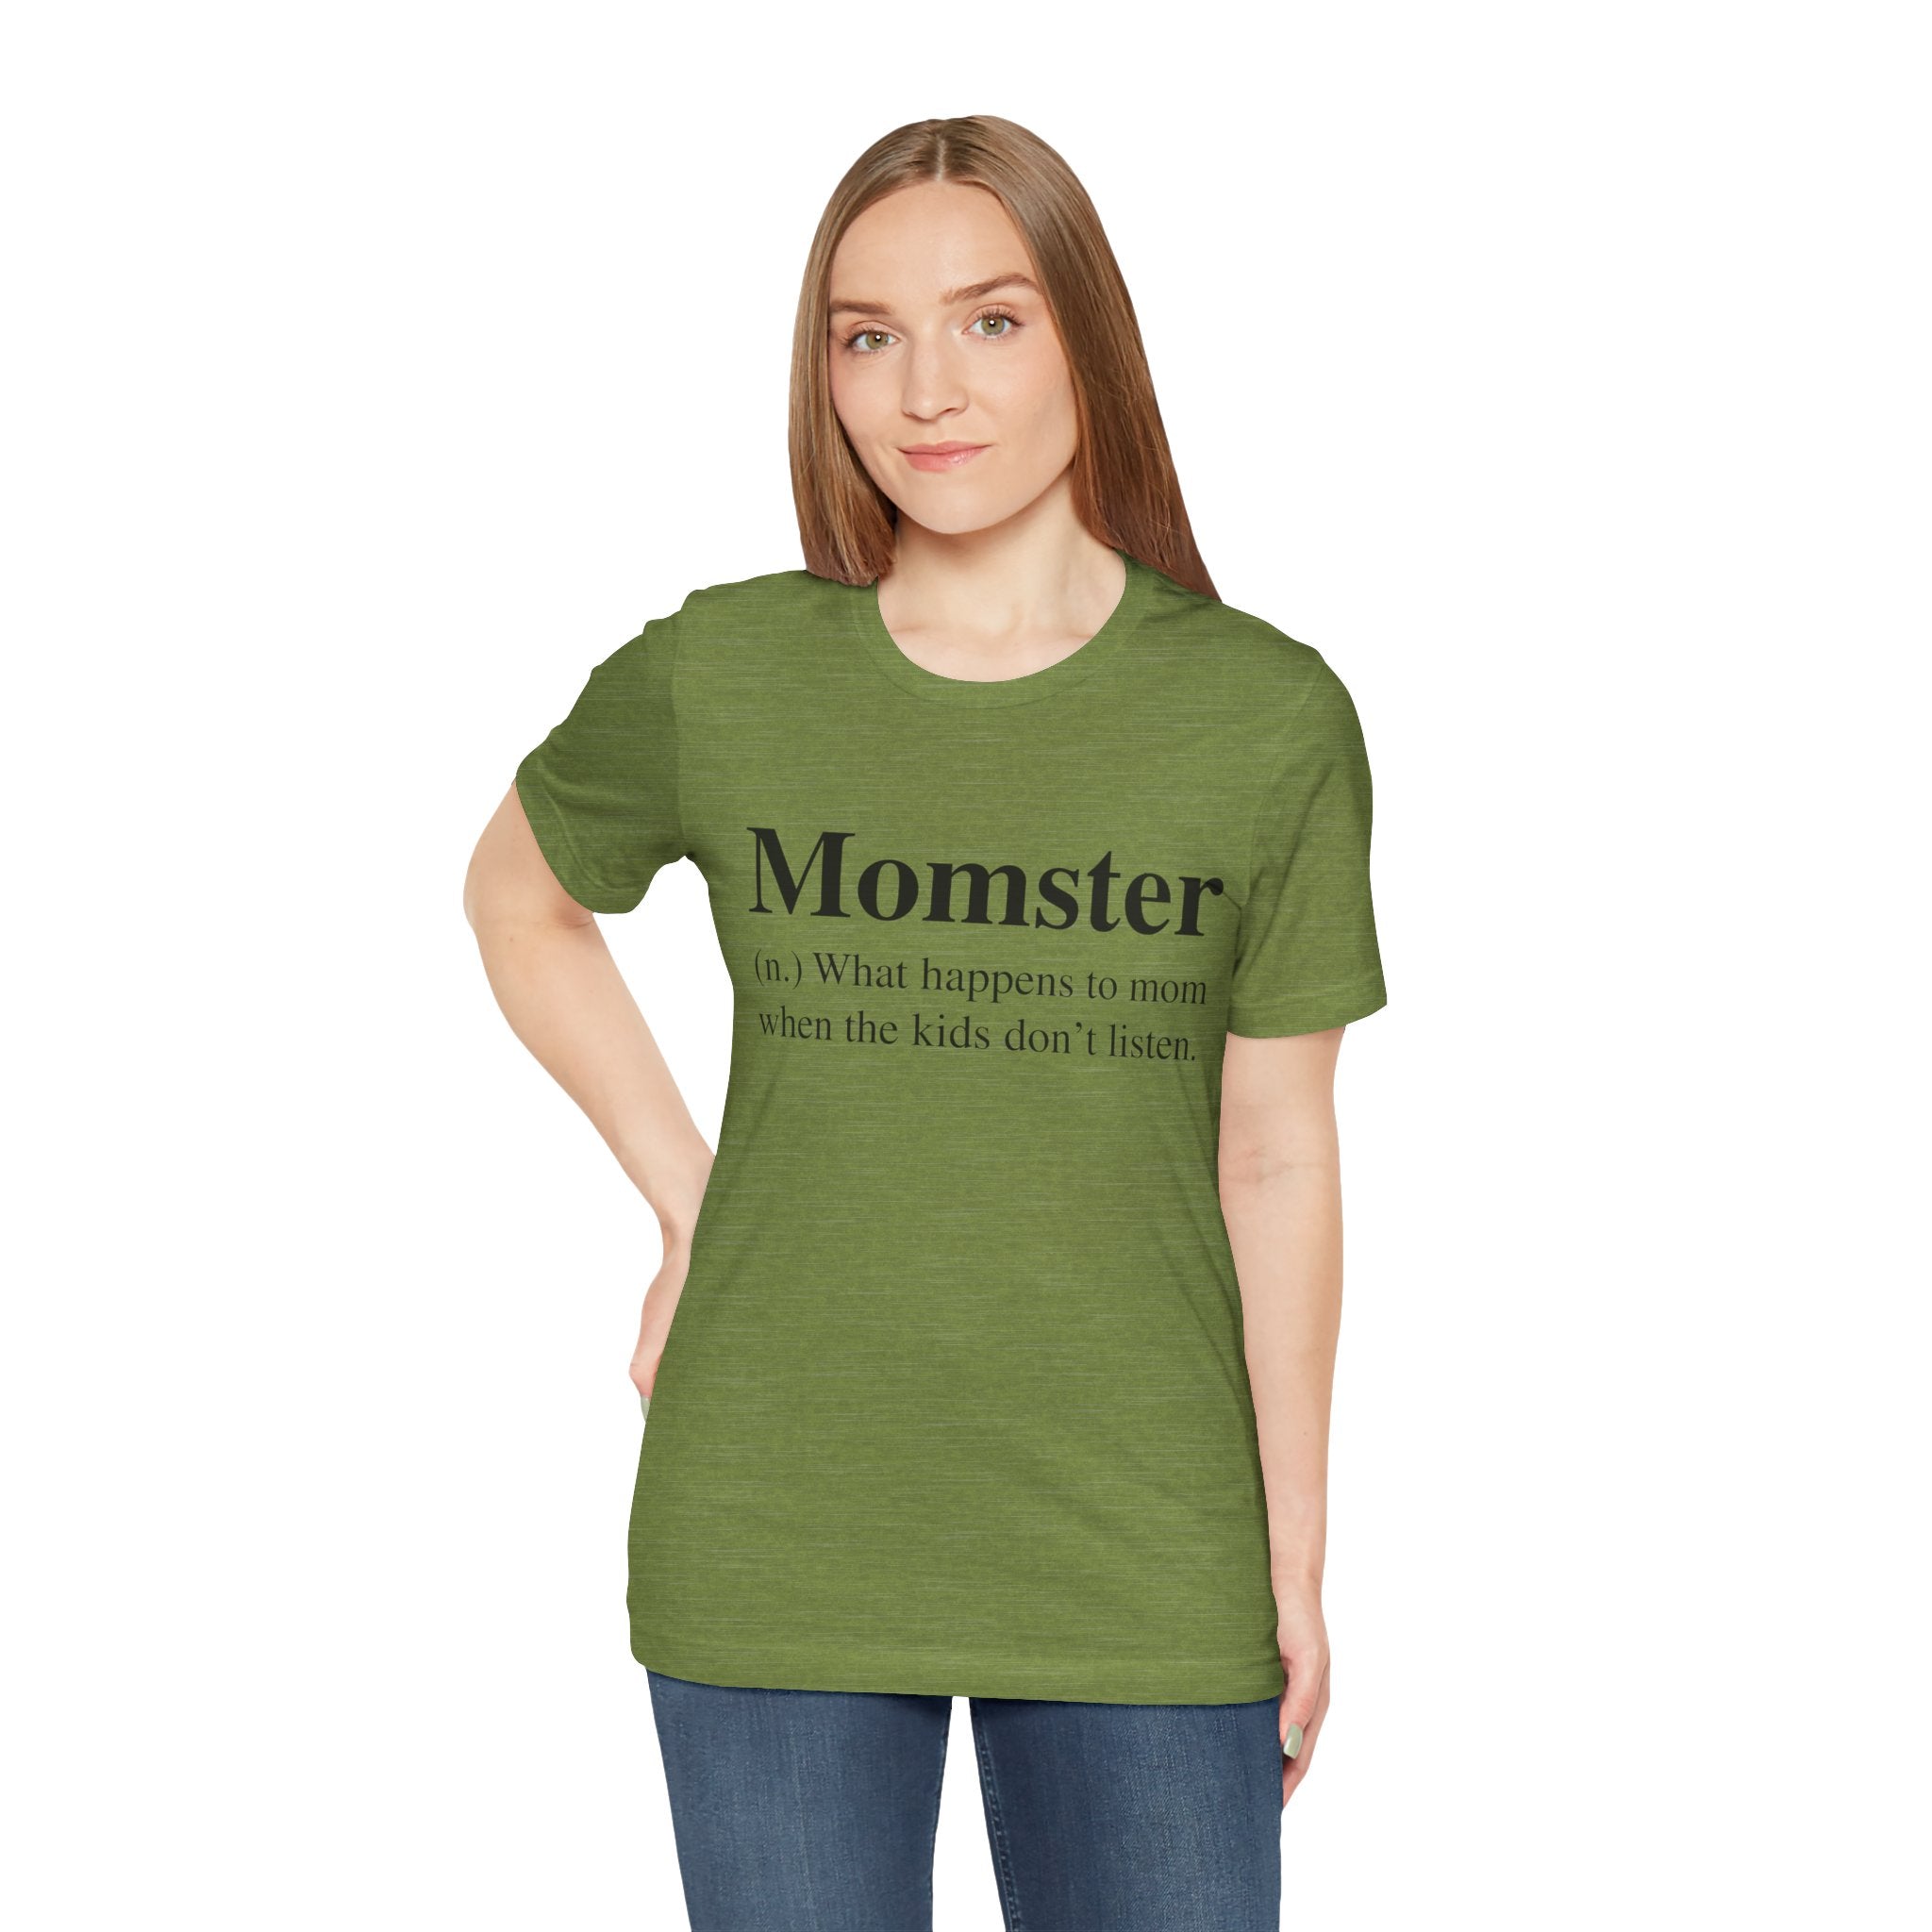 Woman in a soft cotton **Momster T-Shirt** with its definition printed on the front, standing against a plain background.